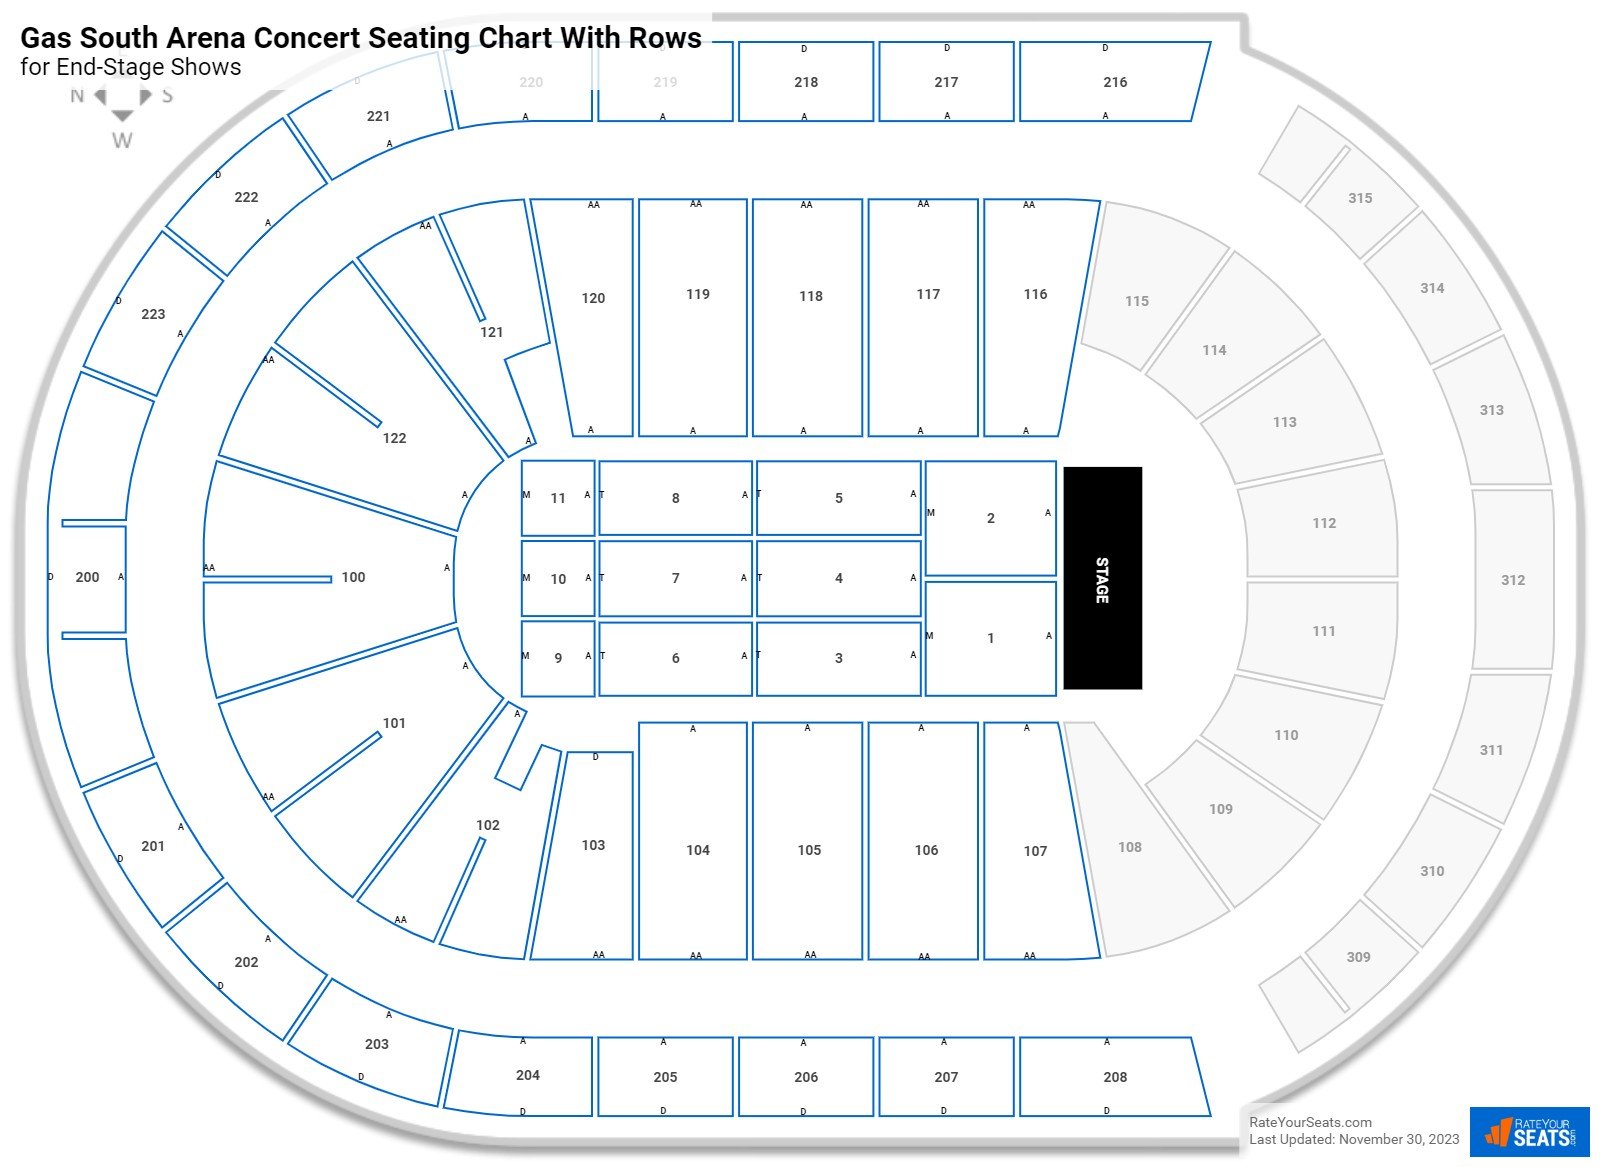 Gas South Arena seating chart with row numbers